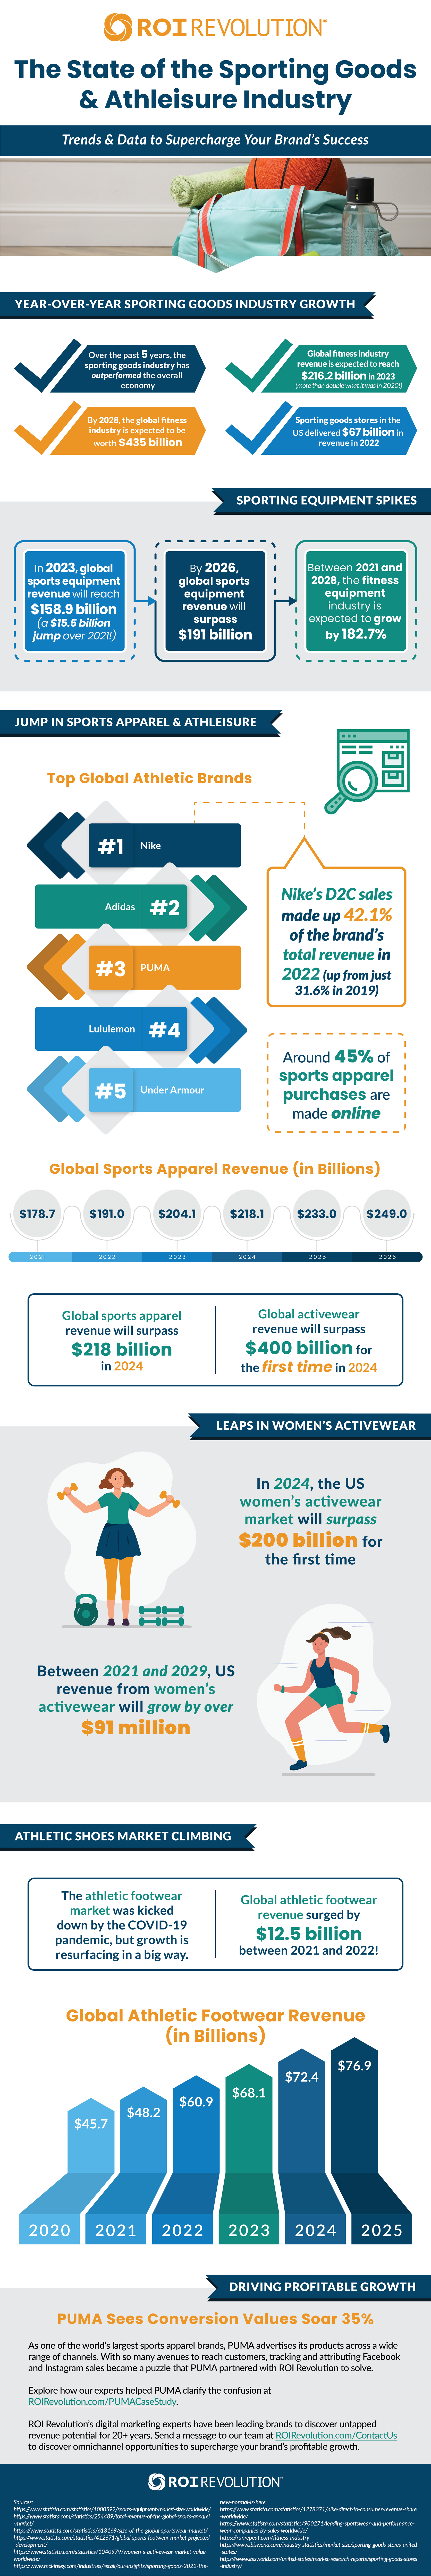 Infographic with statistics on the fitness, athleisure, and sporting goods industry